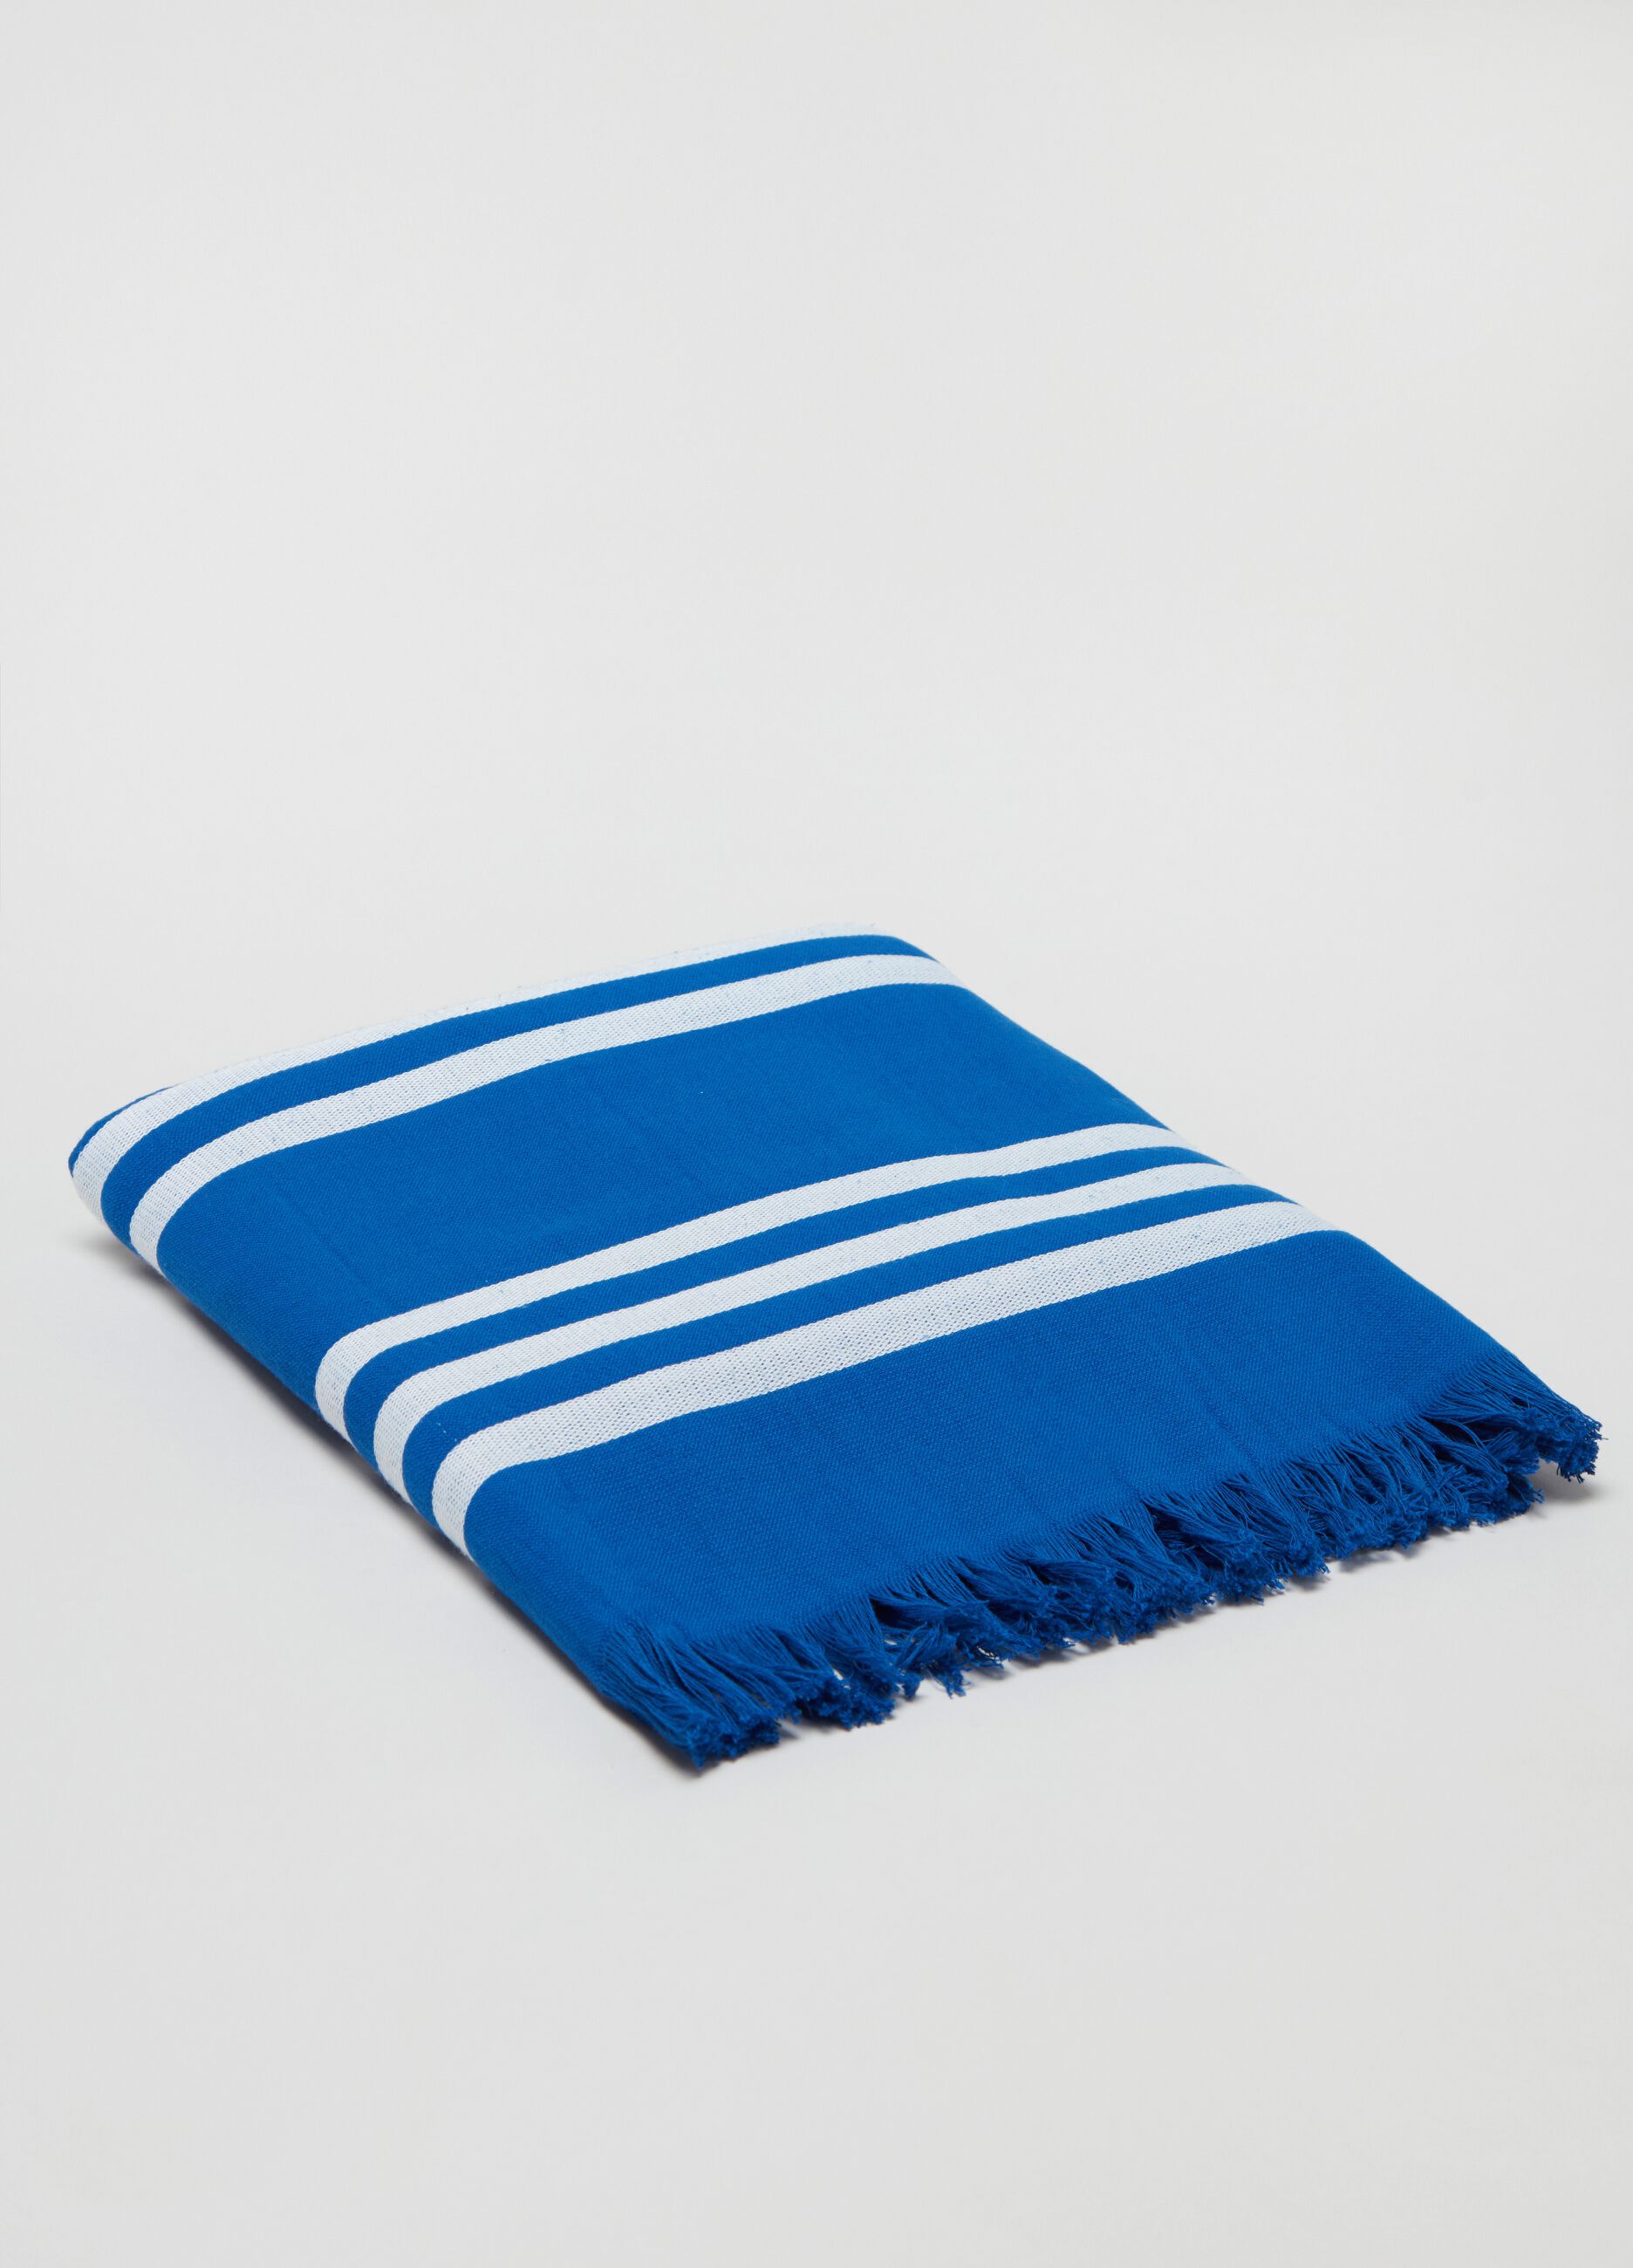 Beach towel with striped pattern.